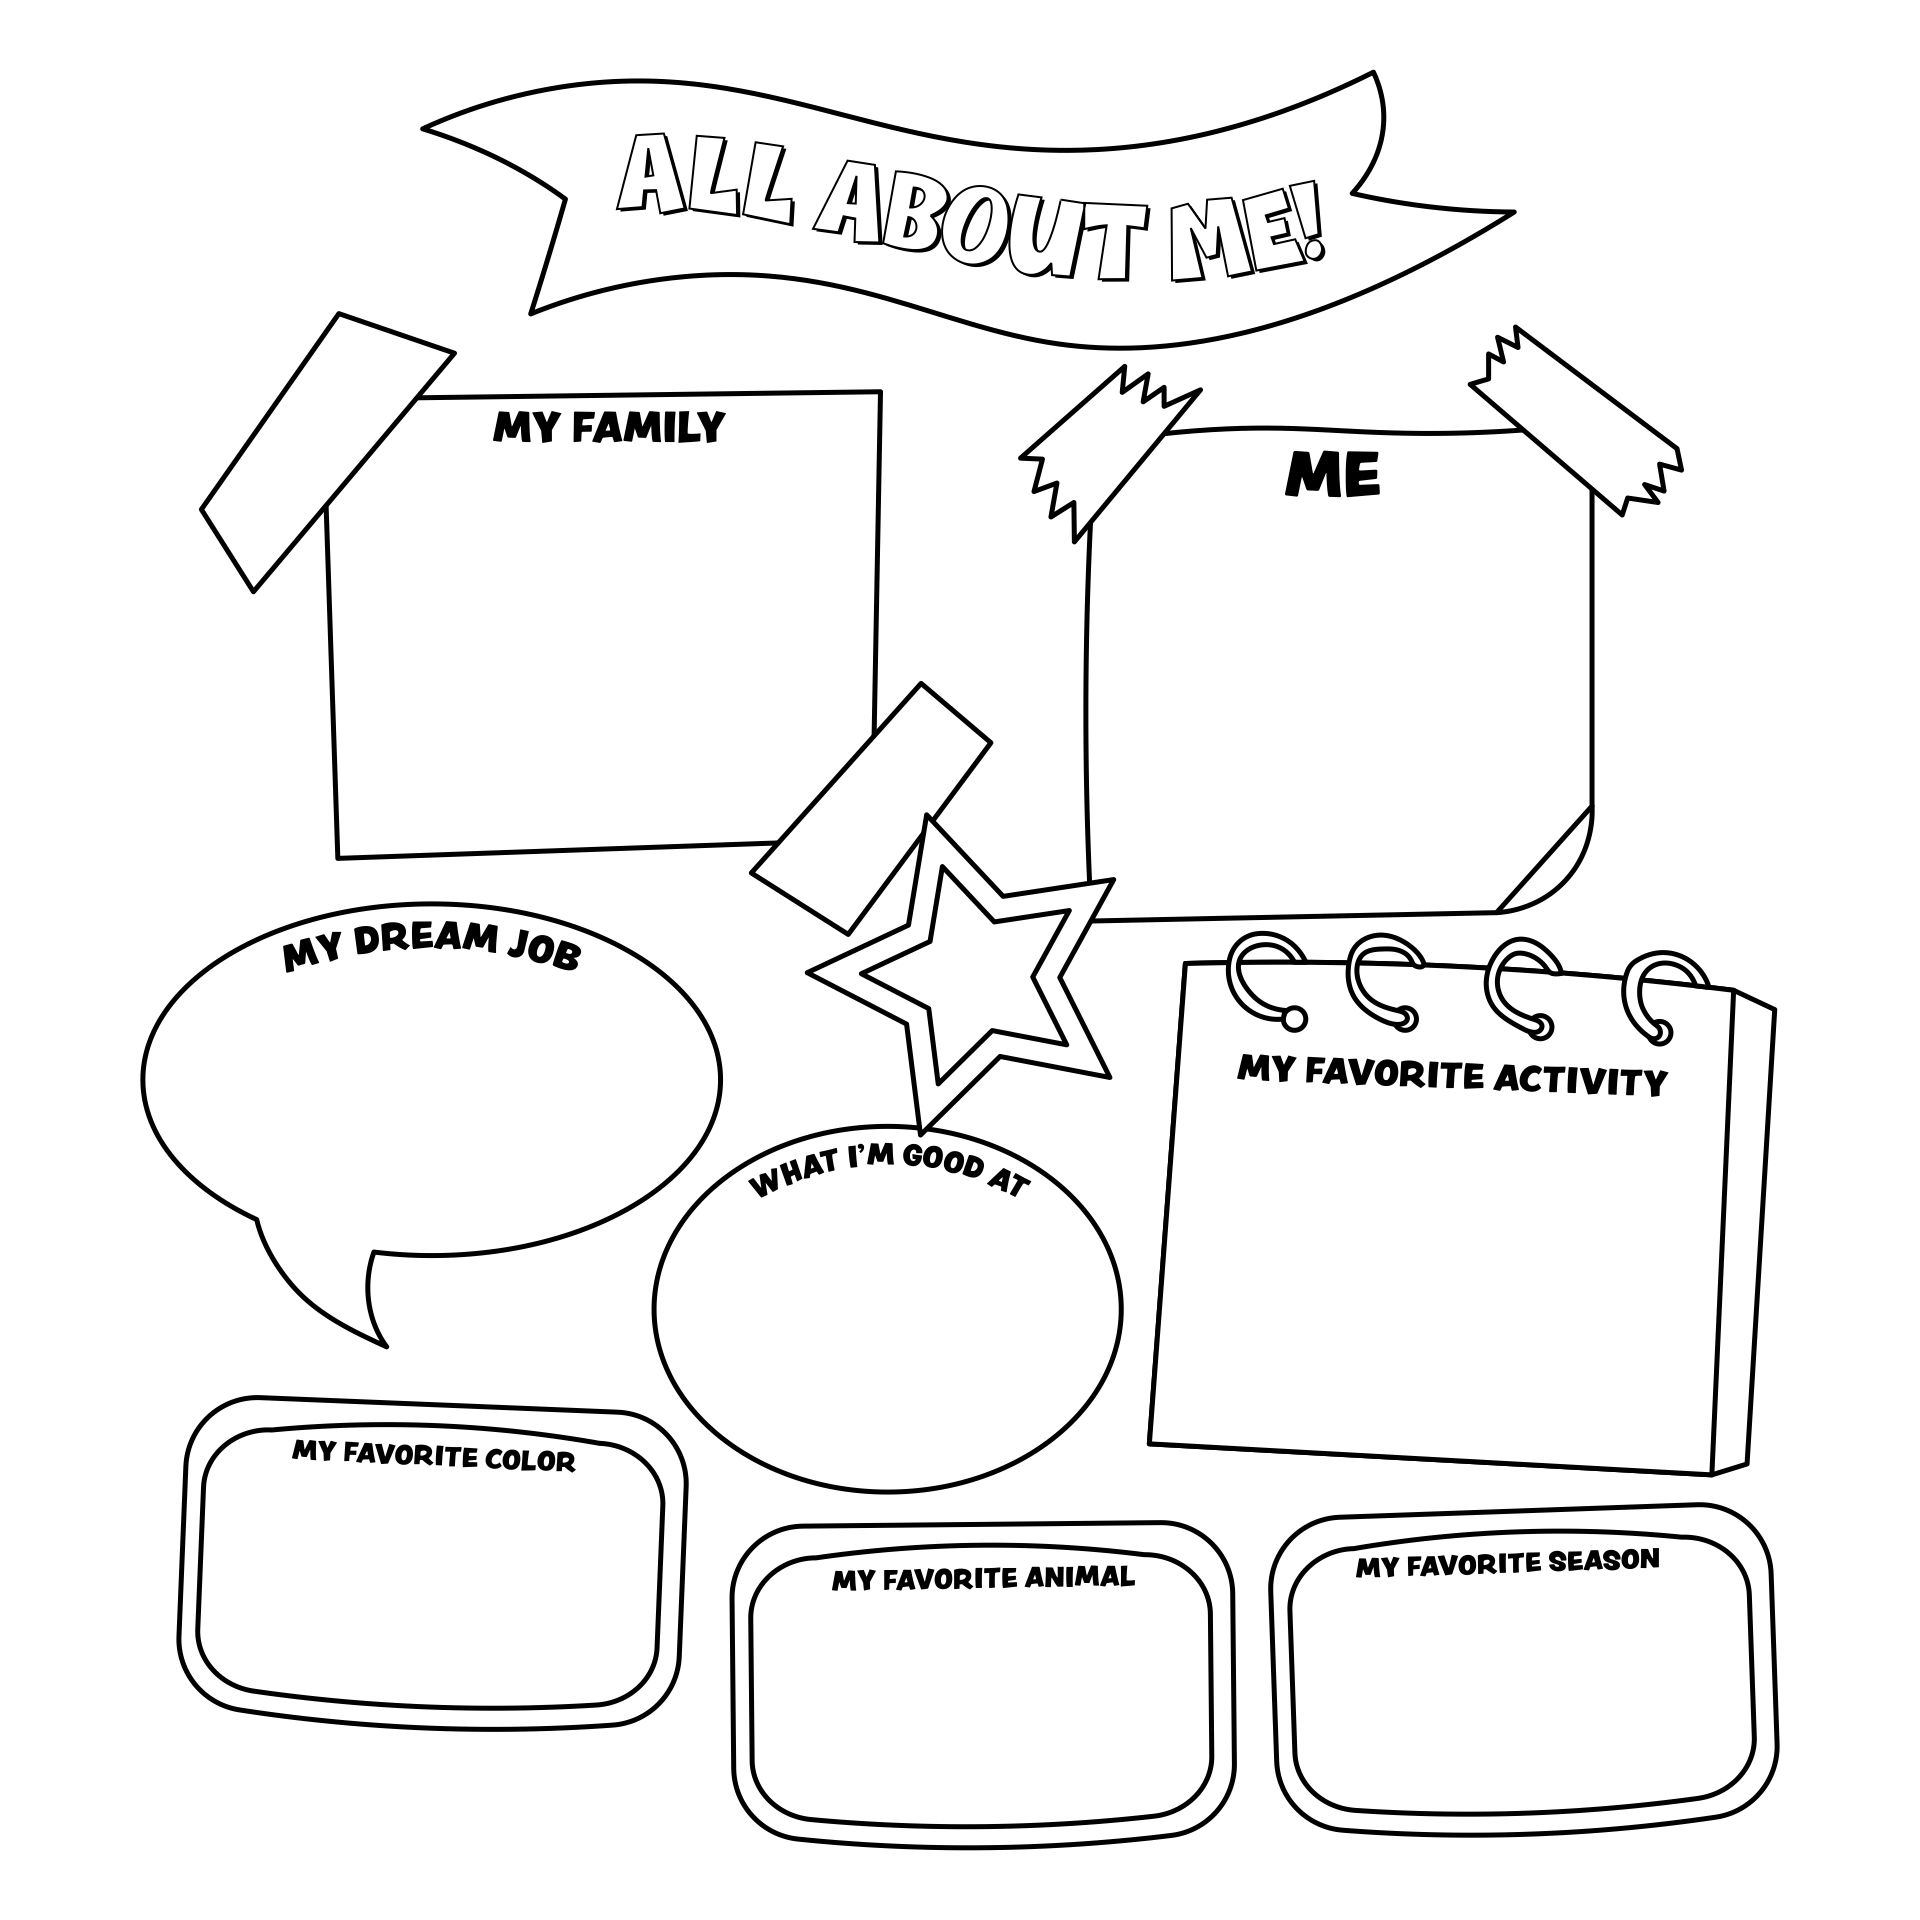 Printable Elementary All About Me Worksheet